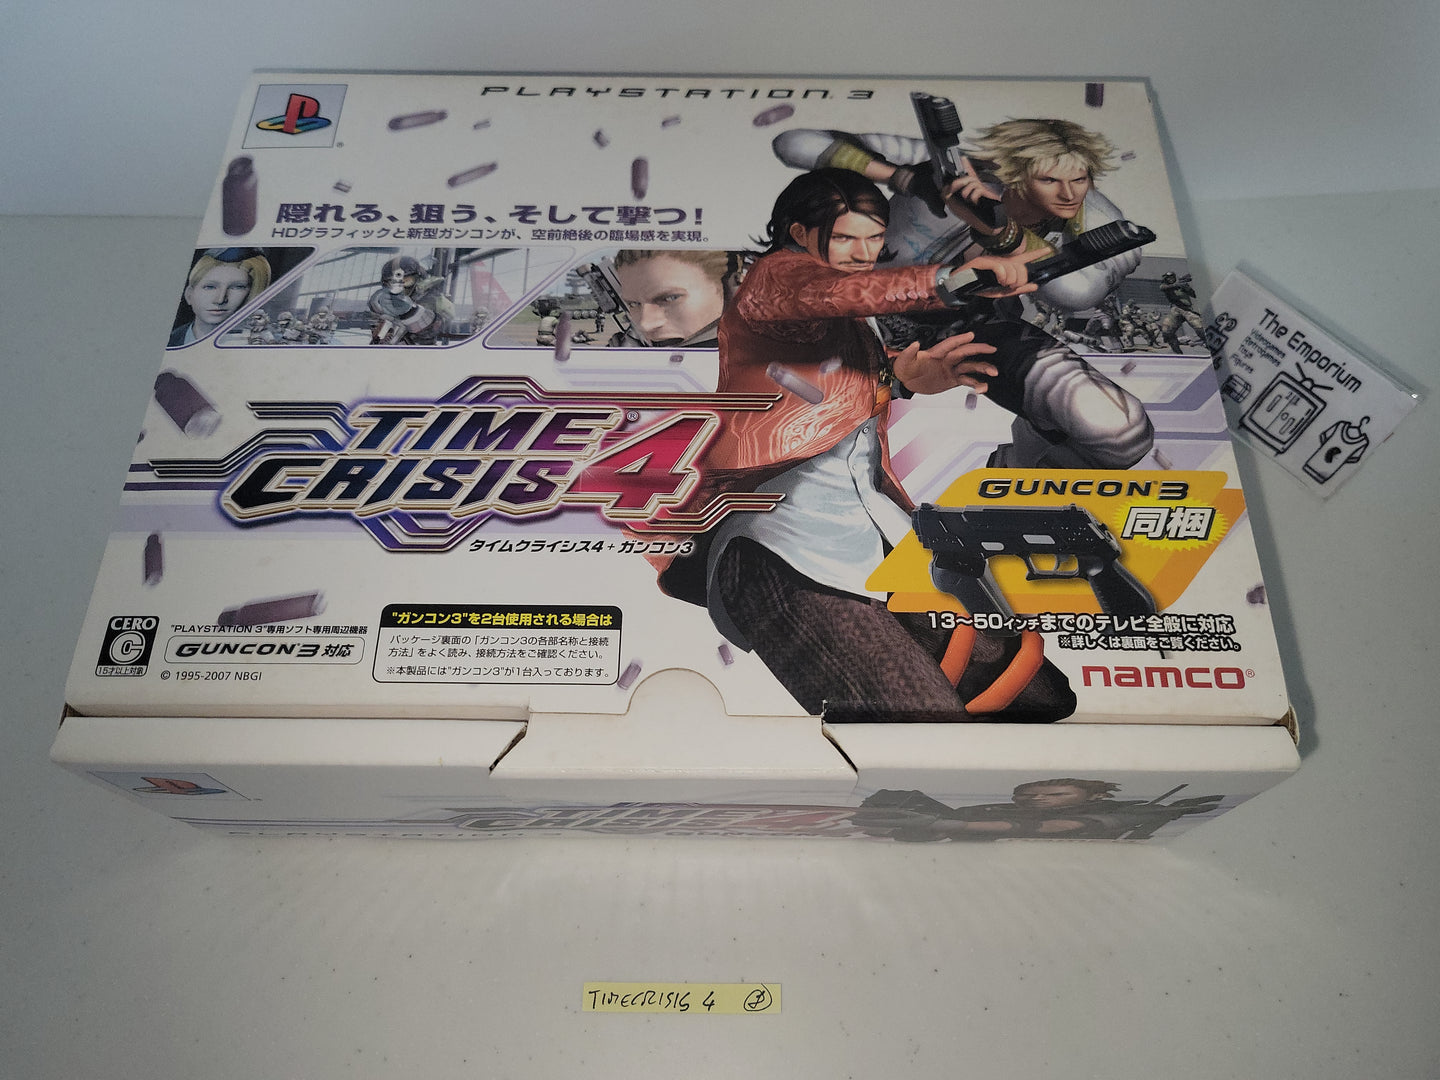 Time Crisis 4 with Guncon 3 Set - Sony PS3 Playstation 3